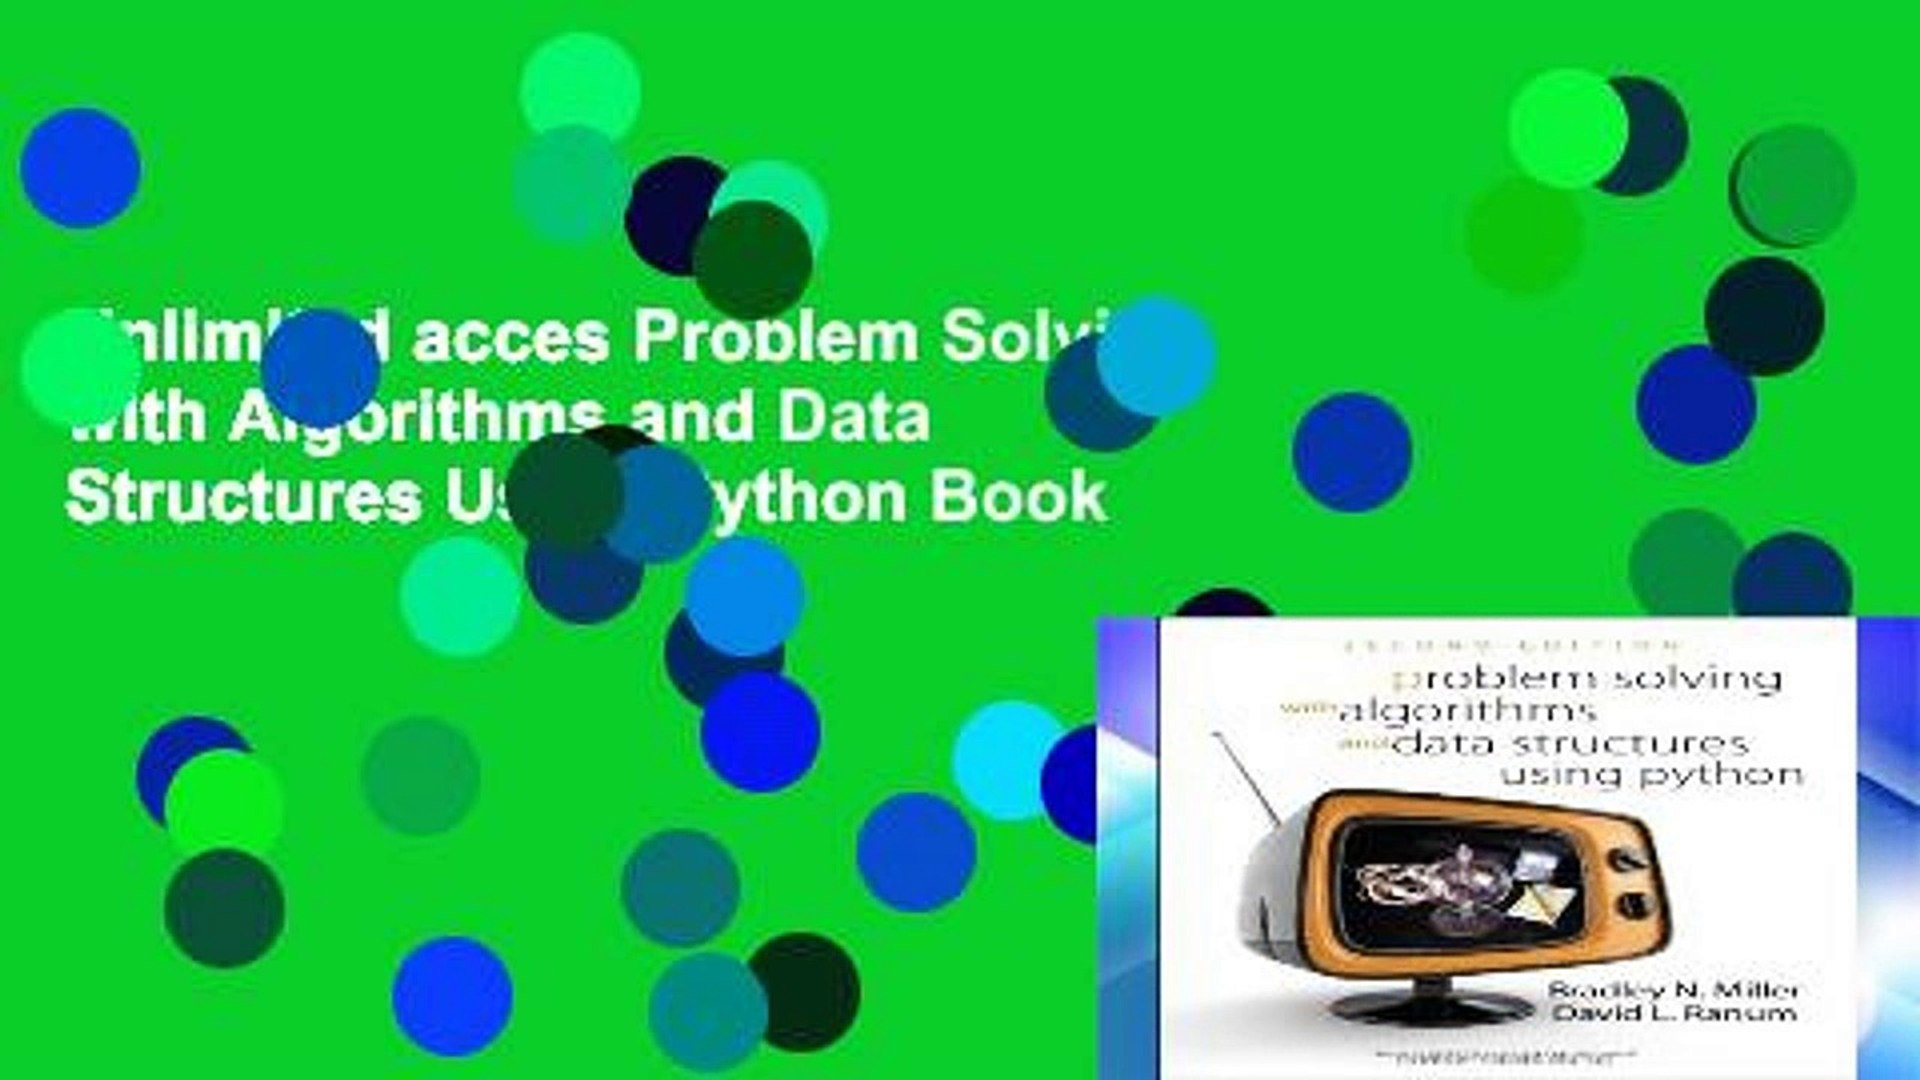 Unlimited acces Problem Solving with Algorithms and Data Structures Using Python Book